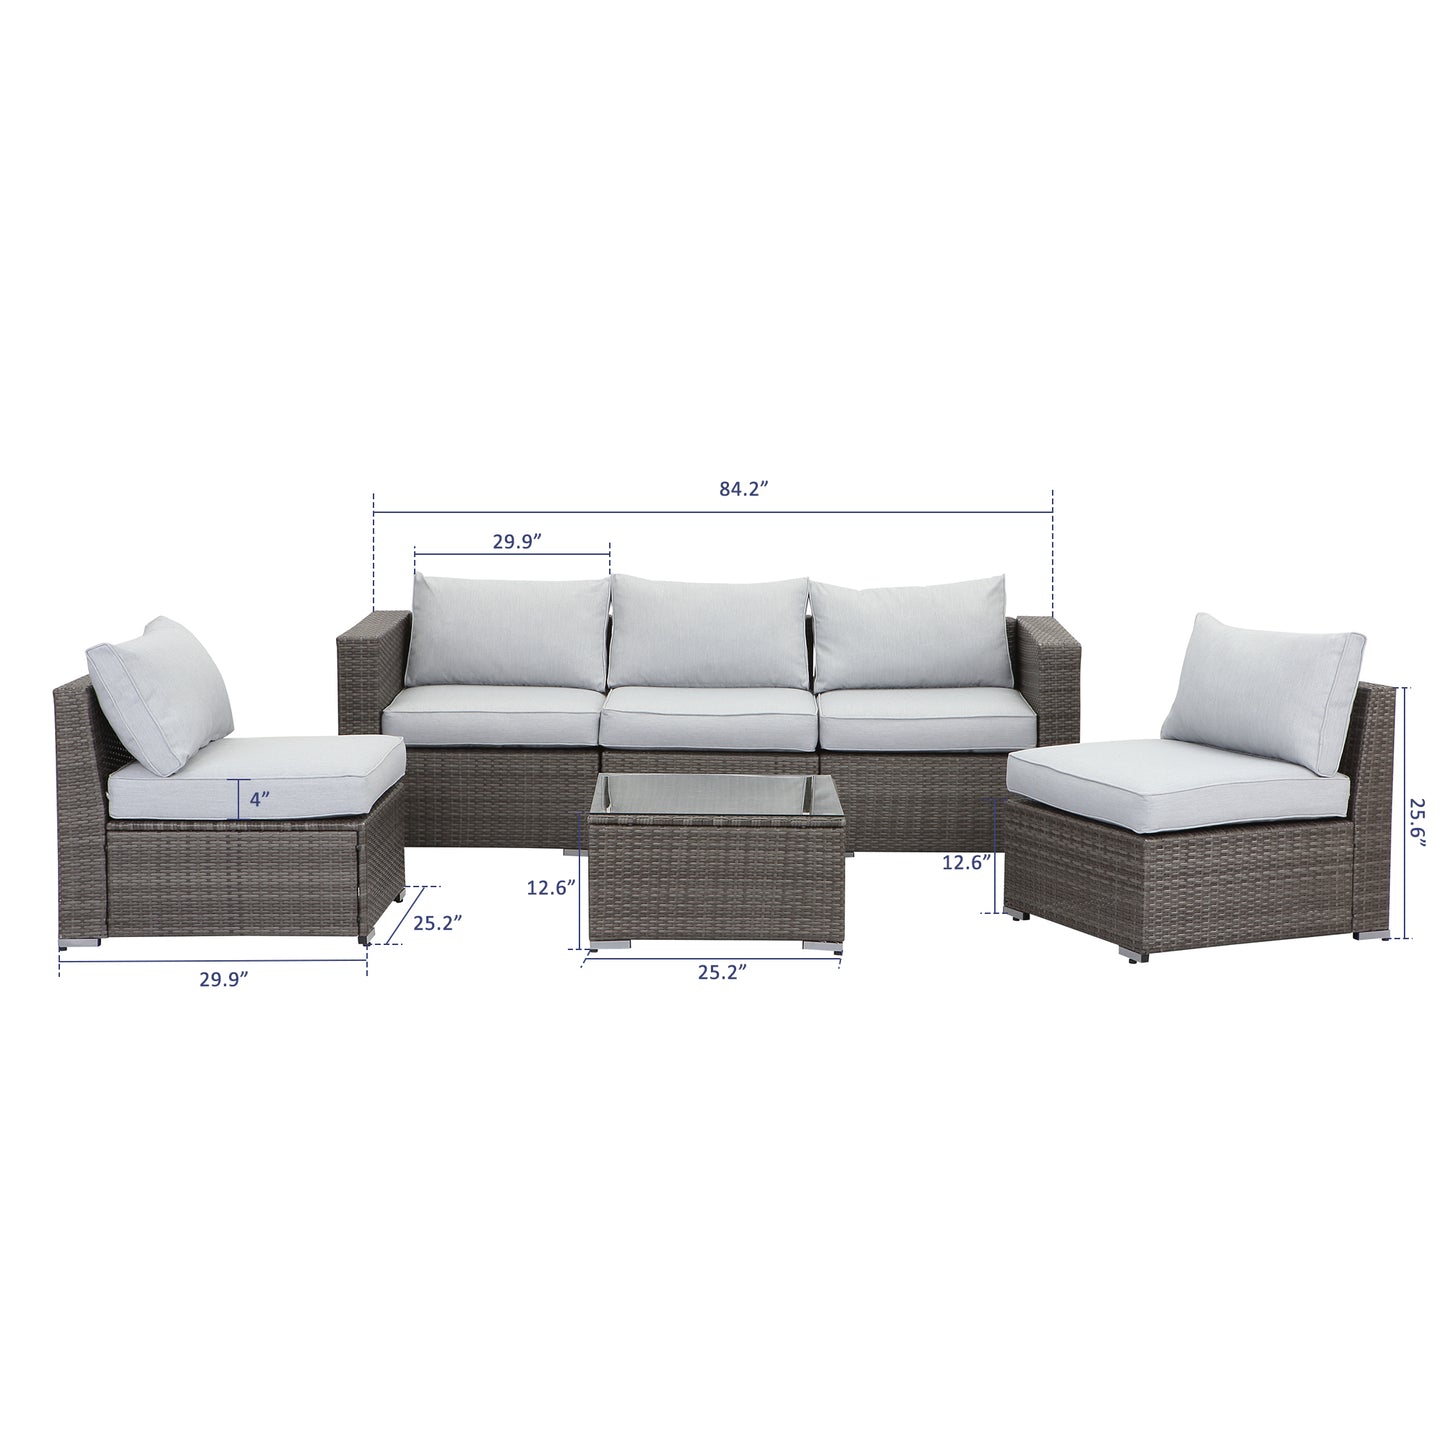 6 Piece Outdoor Sectional Furniture Set